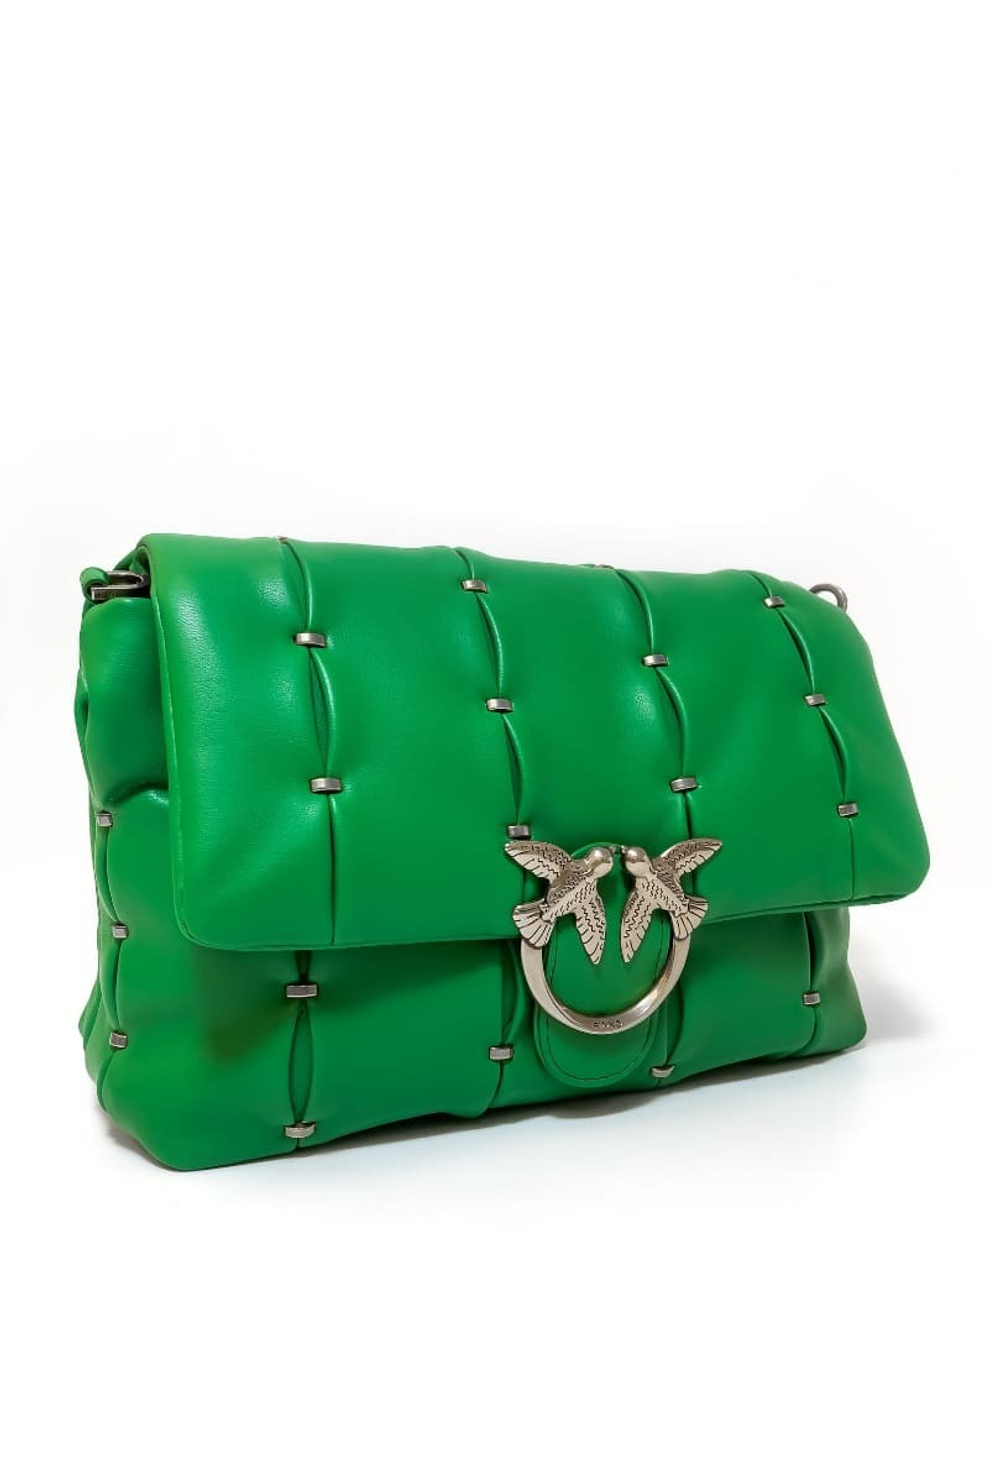 CLASSIC LOVE BAG PUFF PINCHED – green